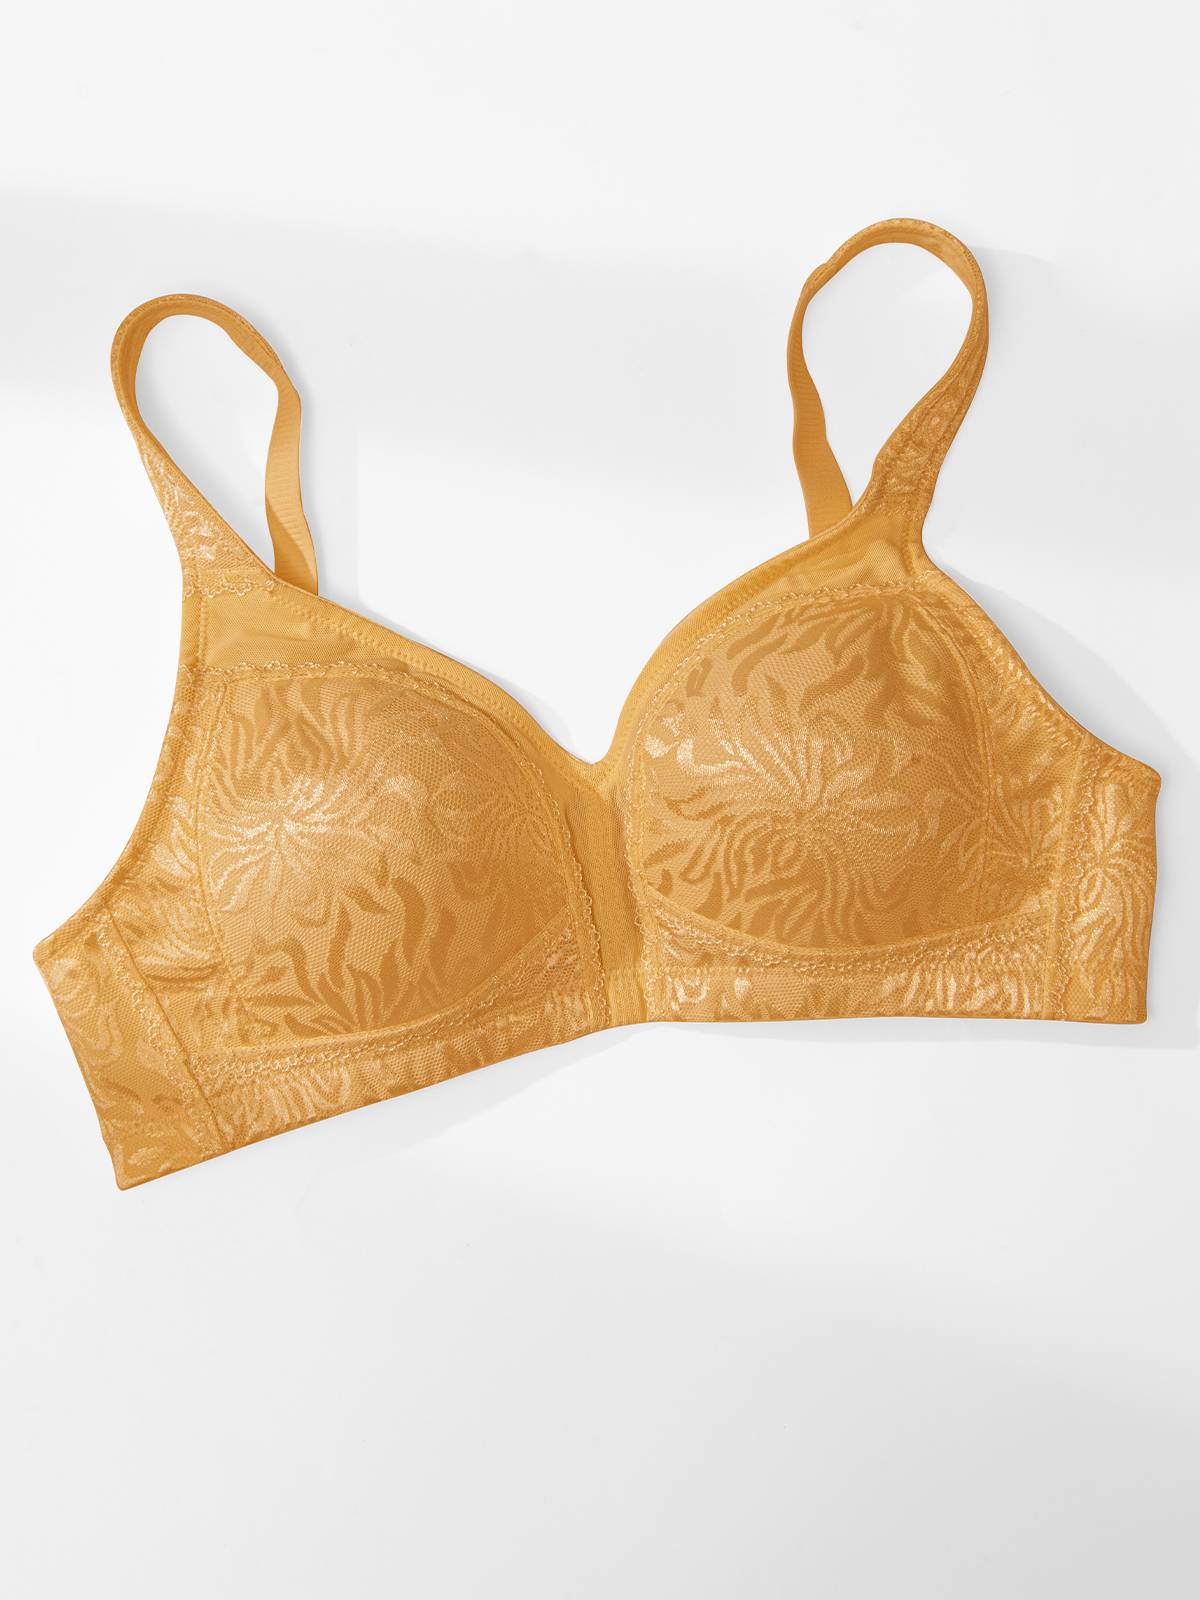 Minimizer Full Coverage Bra Non Padded Wire-free Gold